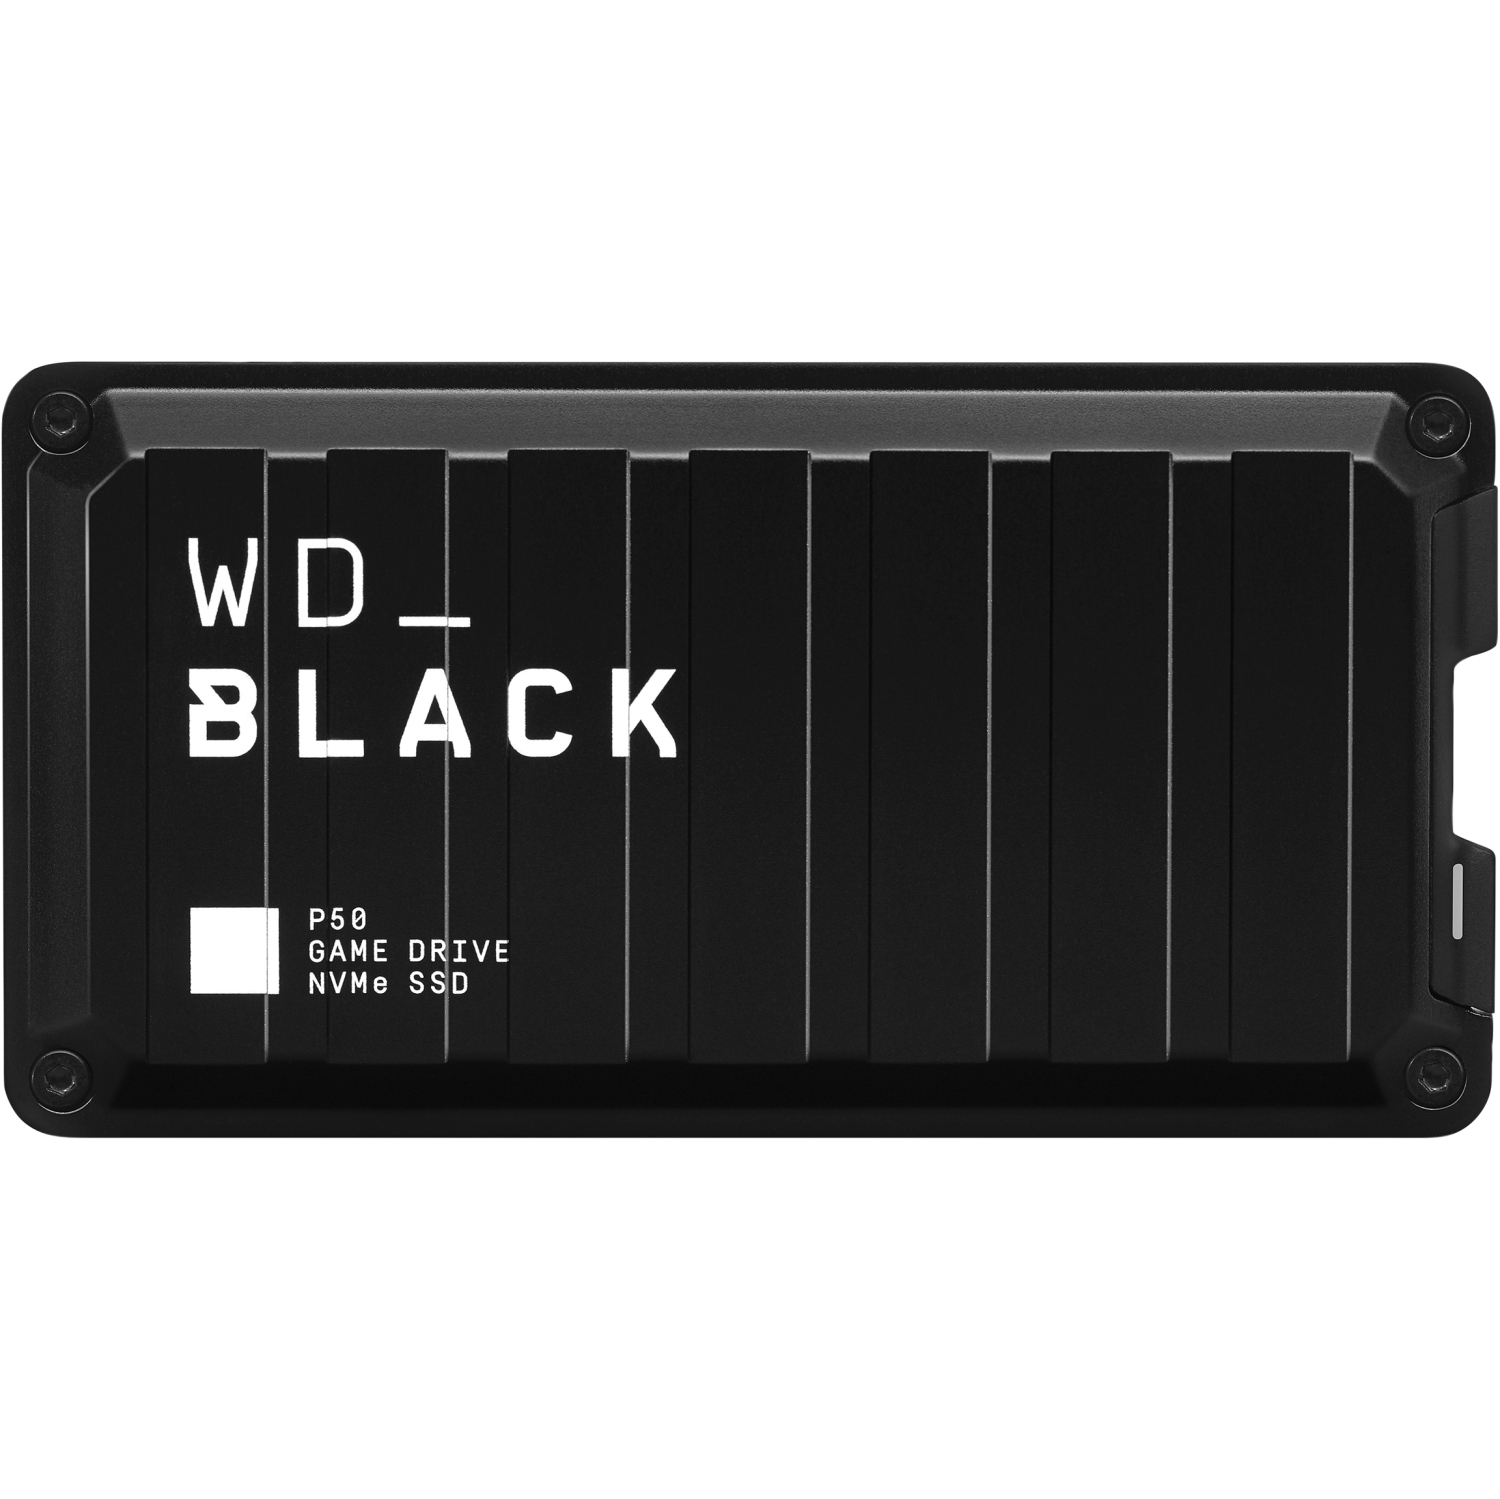 WD_Black 500GB P50 Game Drive Portable External SSD, Compatible with PS4, Xbox One, PC, Mac - WDBA3S5000ABK-WESN